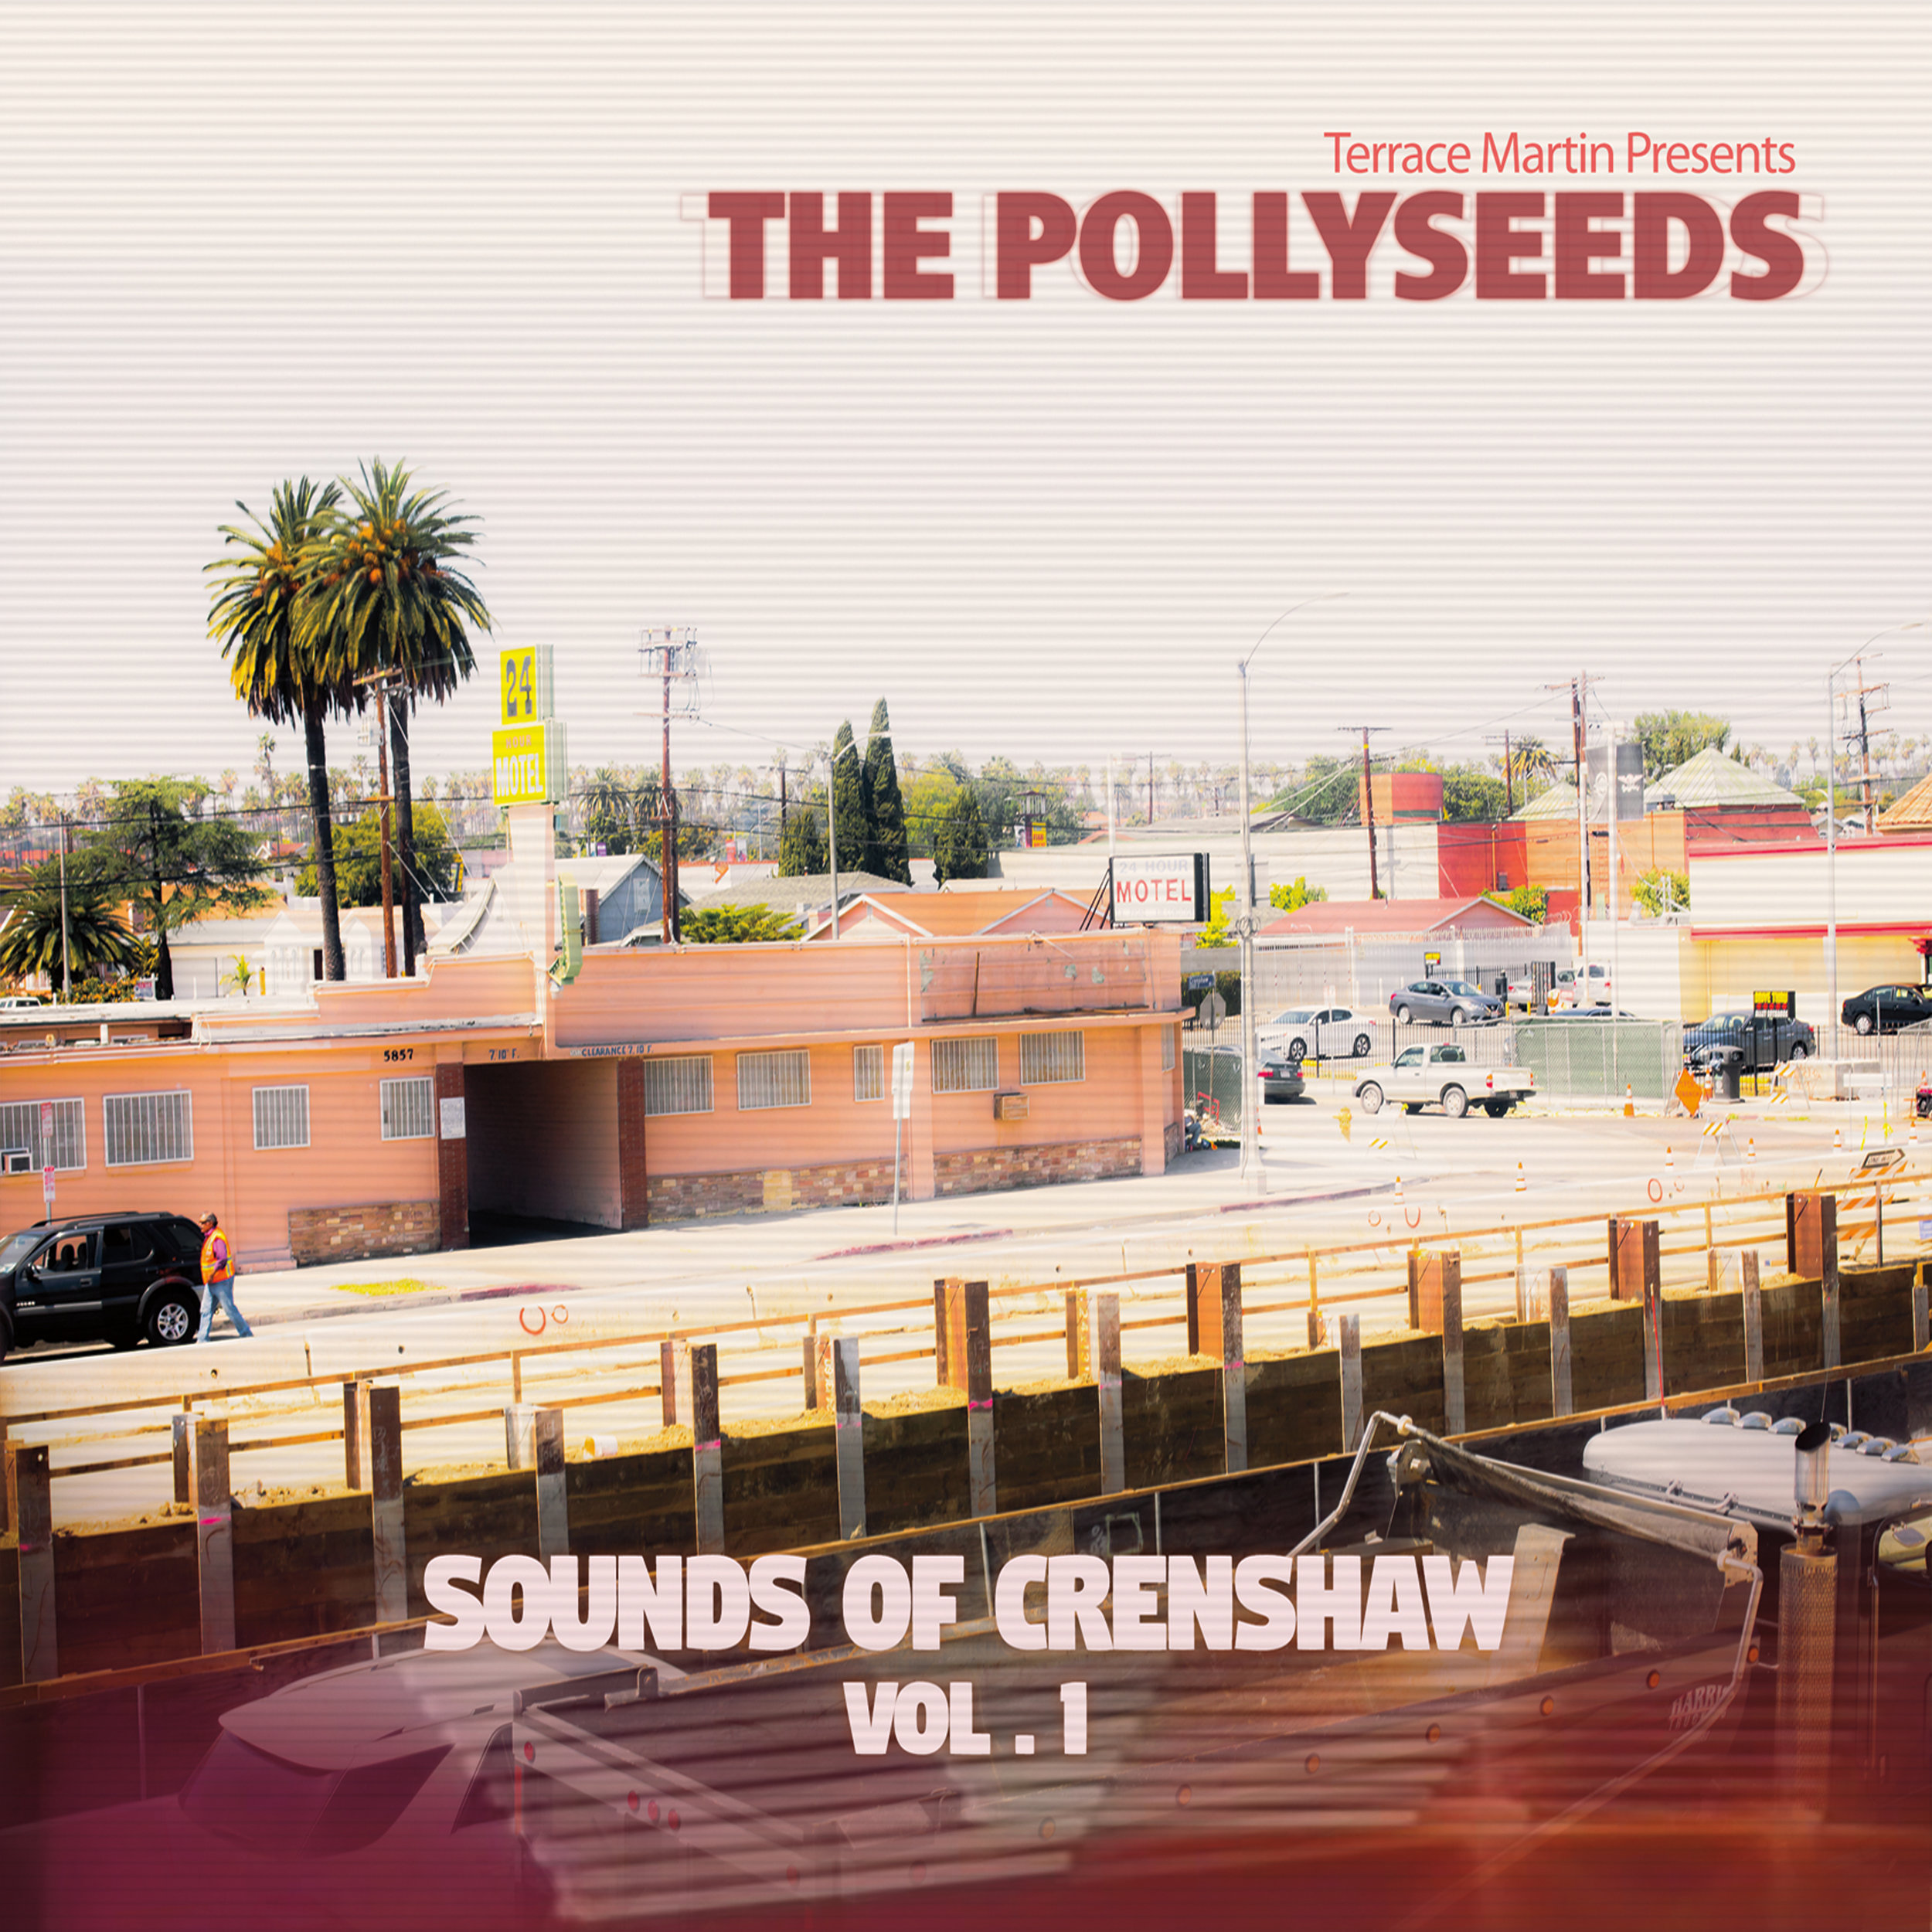 The Pollyseeds - Sounds of Crenshaw Vol 1 